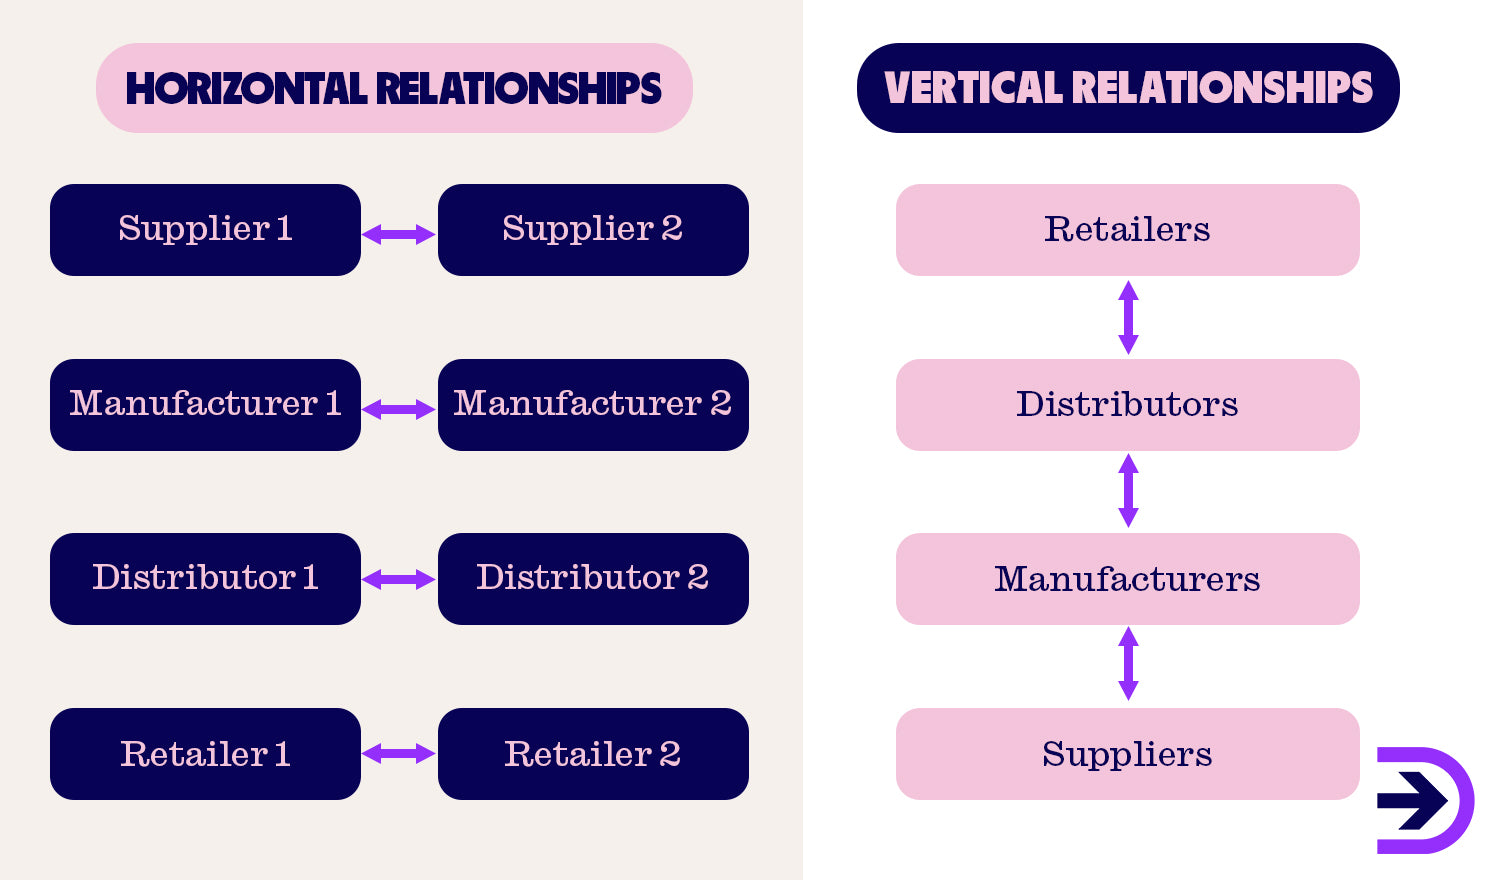 Vertical relationships are the most traditional model between retailers and suppliers, whereas horizontal relationships are working in conjunction with one another.